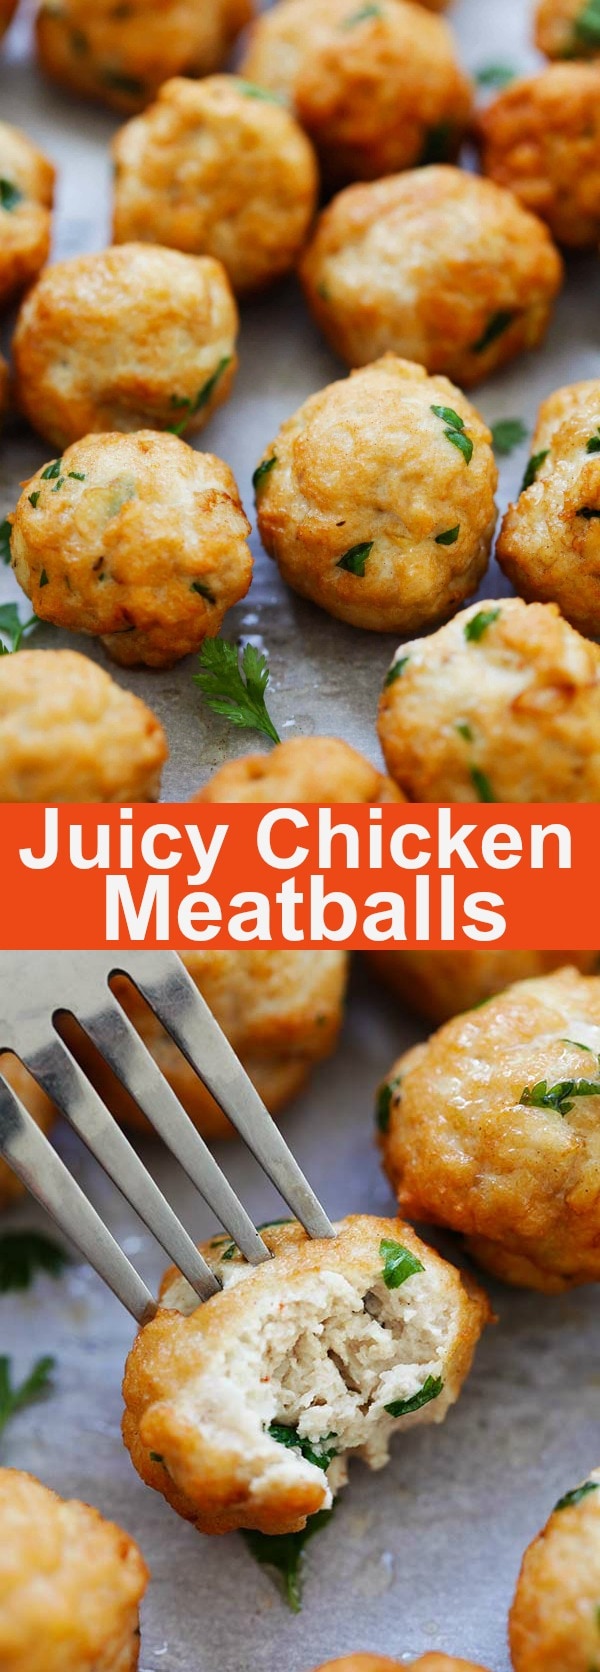 Healthy chicken meatballs made of ground chicken, garlic, onion and lemon juice. Easy, healthy and the best ground chicken meatballs recipe, so easy to make and everyone loves them | rasamalaysia.com